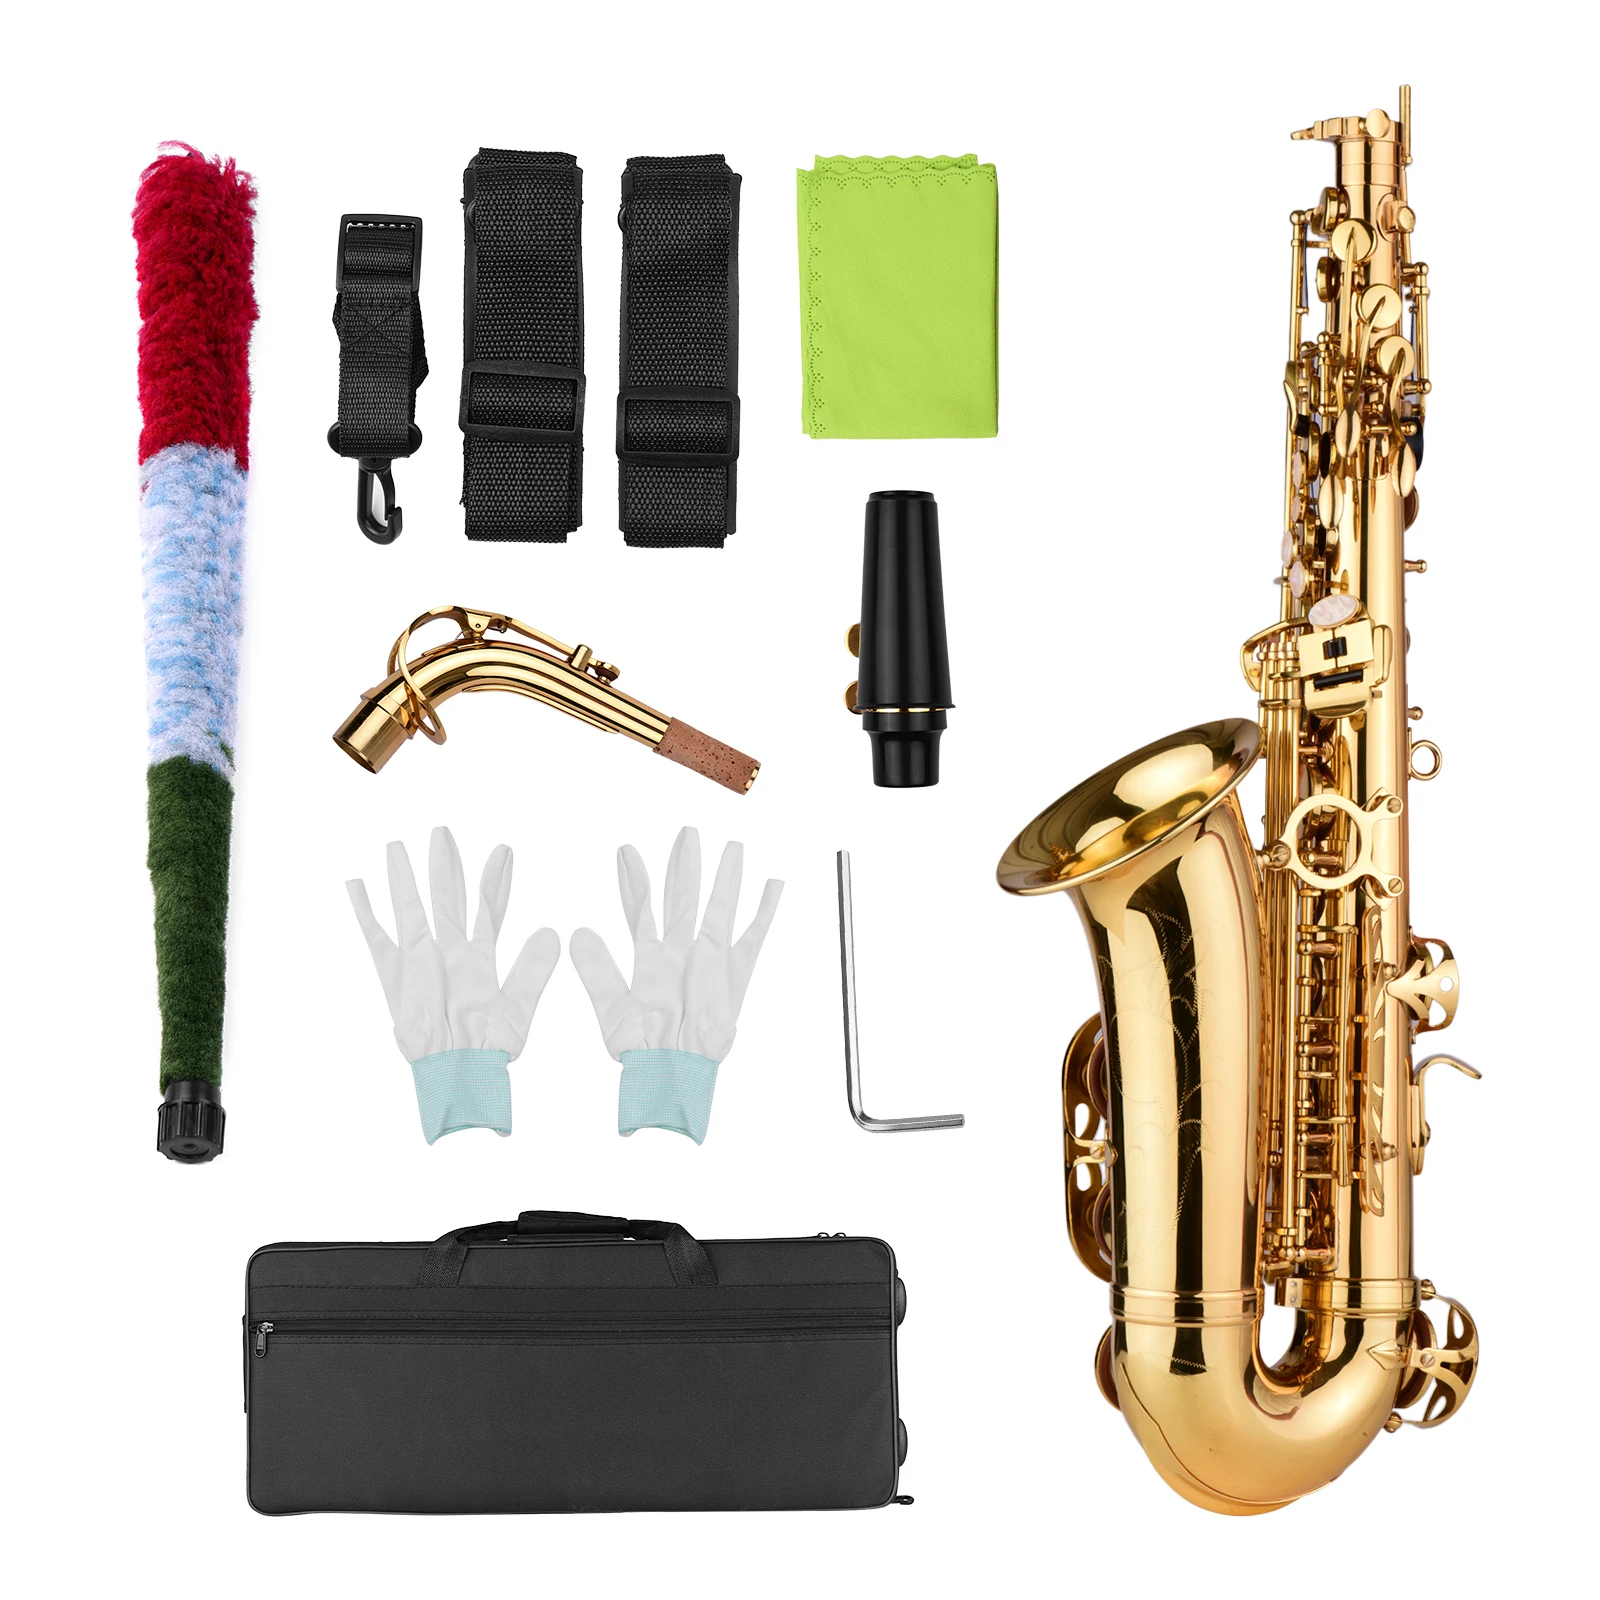 Blue Lacquer E Flat Alto Sax Full Kit bE Alto Saxophone Kit, Professional  Sax Woodwind Instrument for Beginner/Students/Performance, Quality Brass